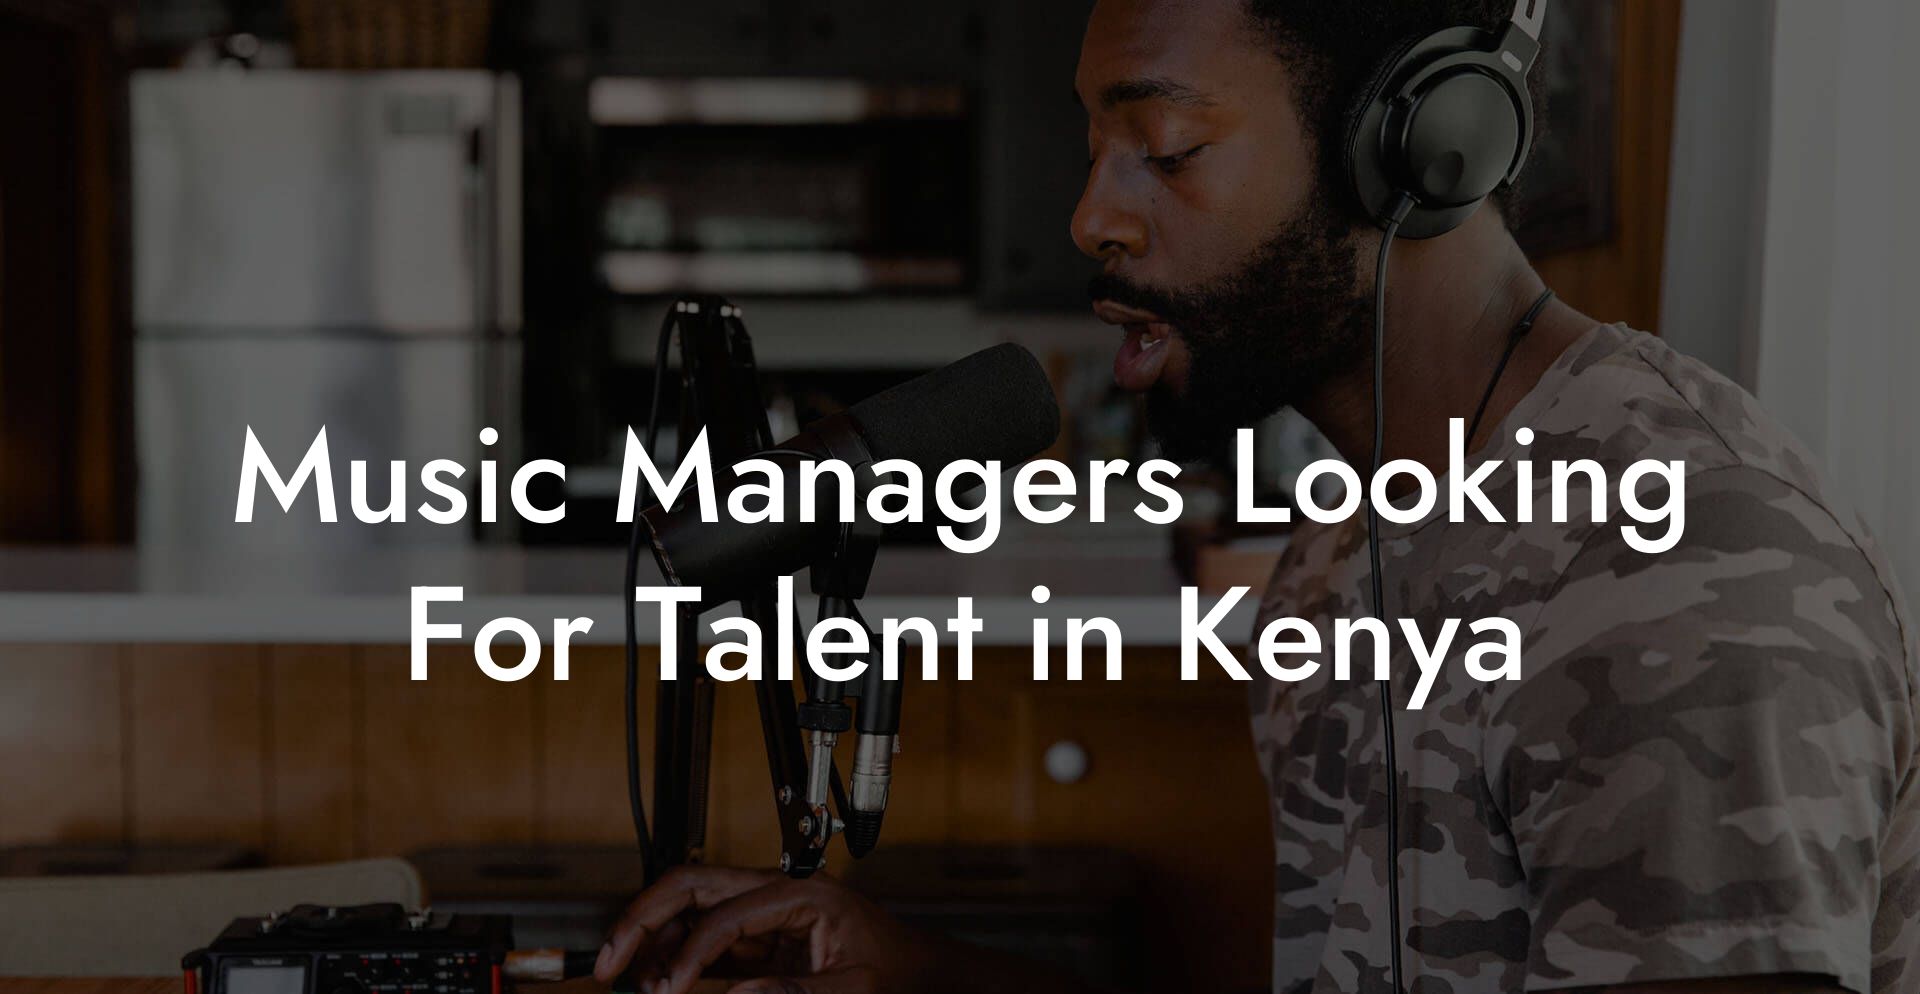 Music Managers Looking For Talent in Kenya